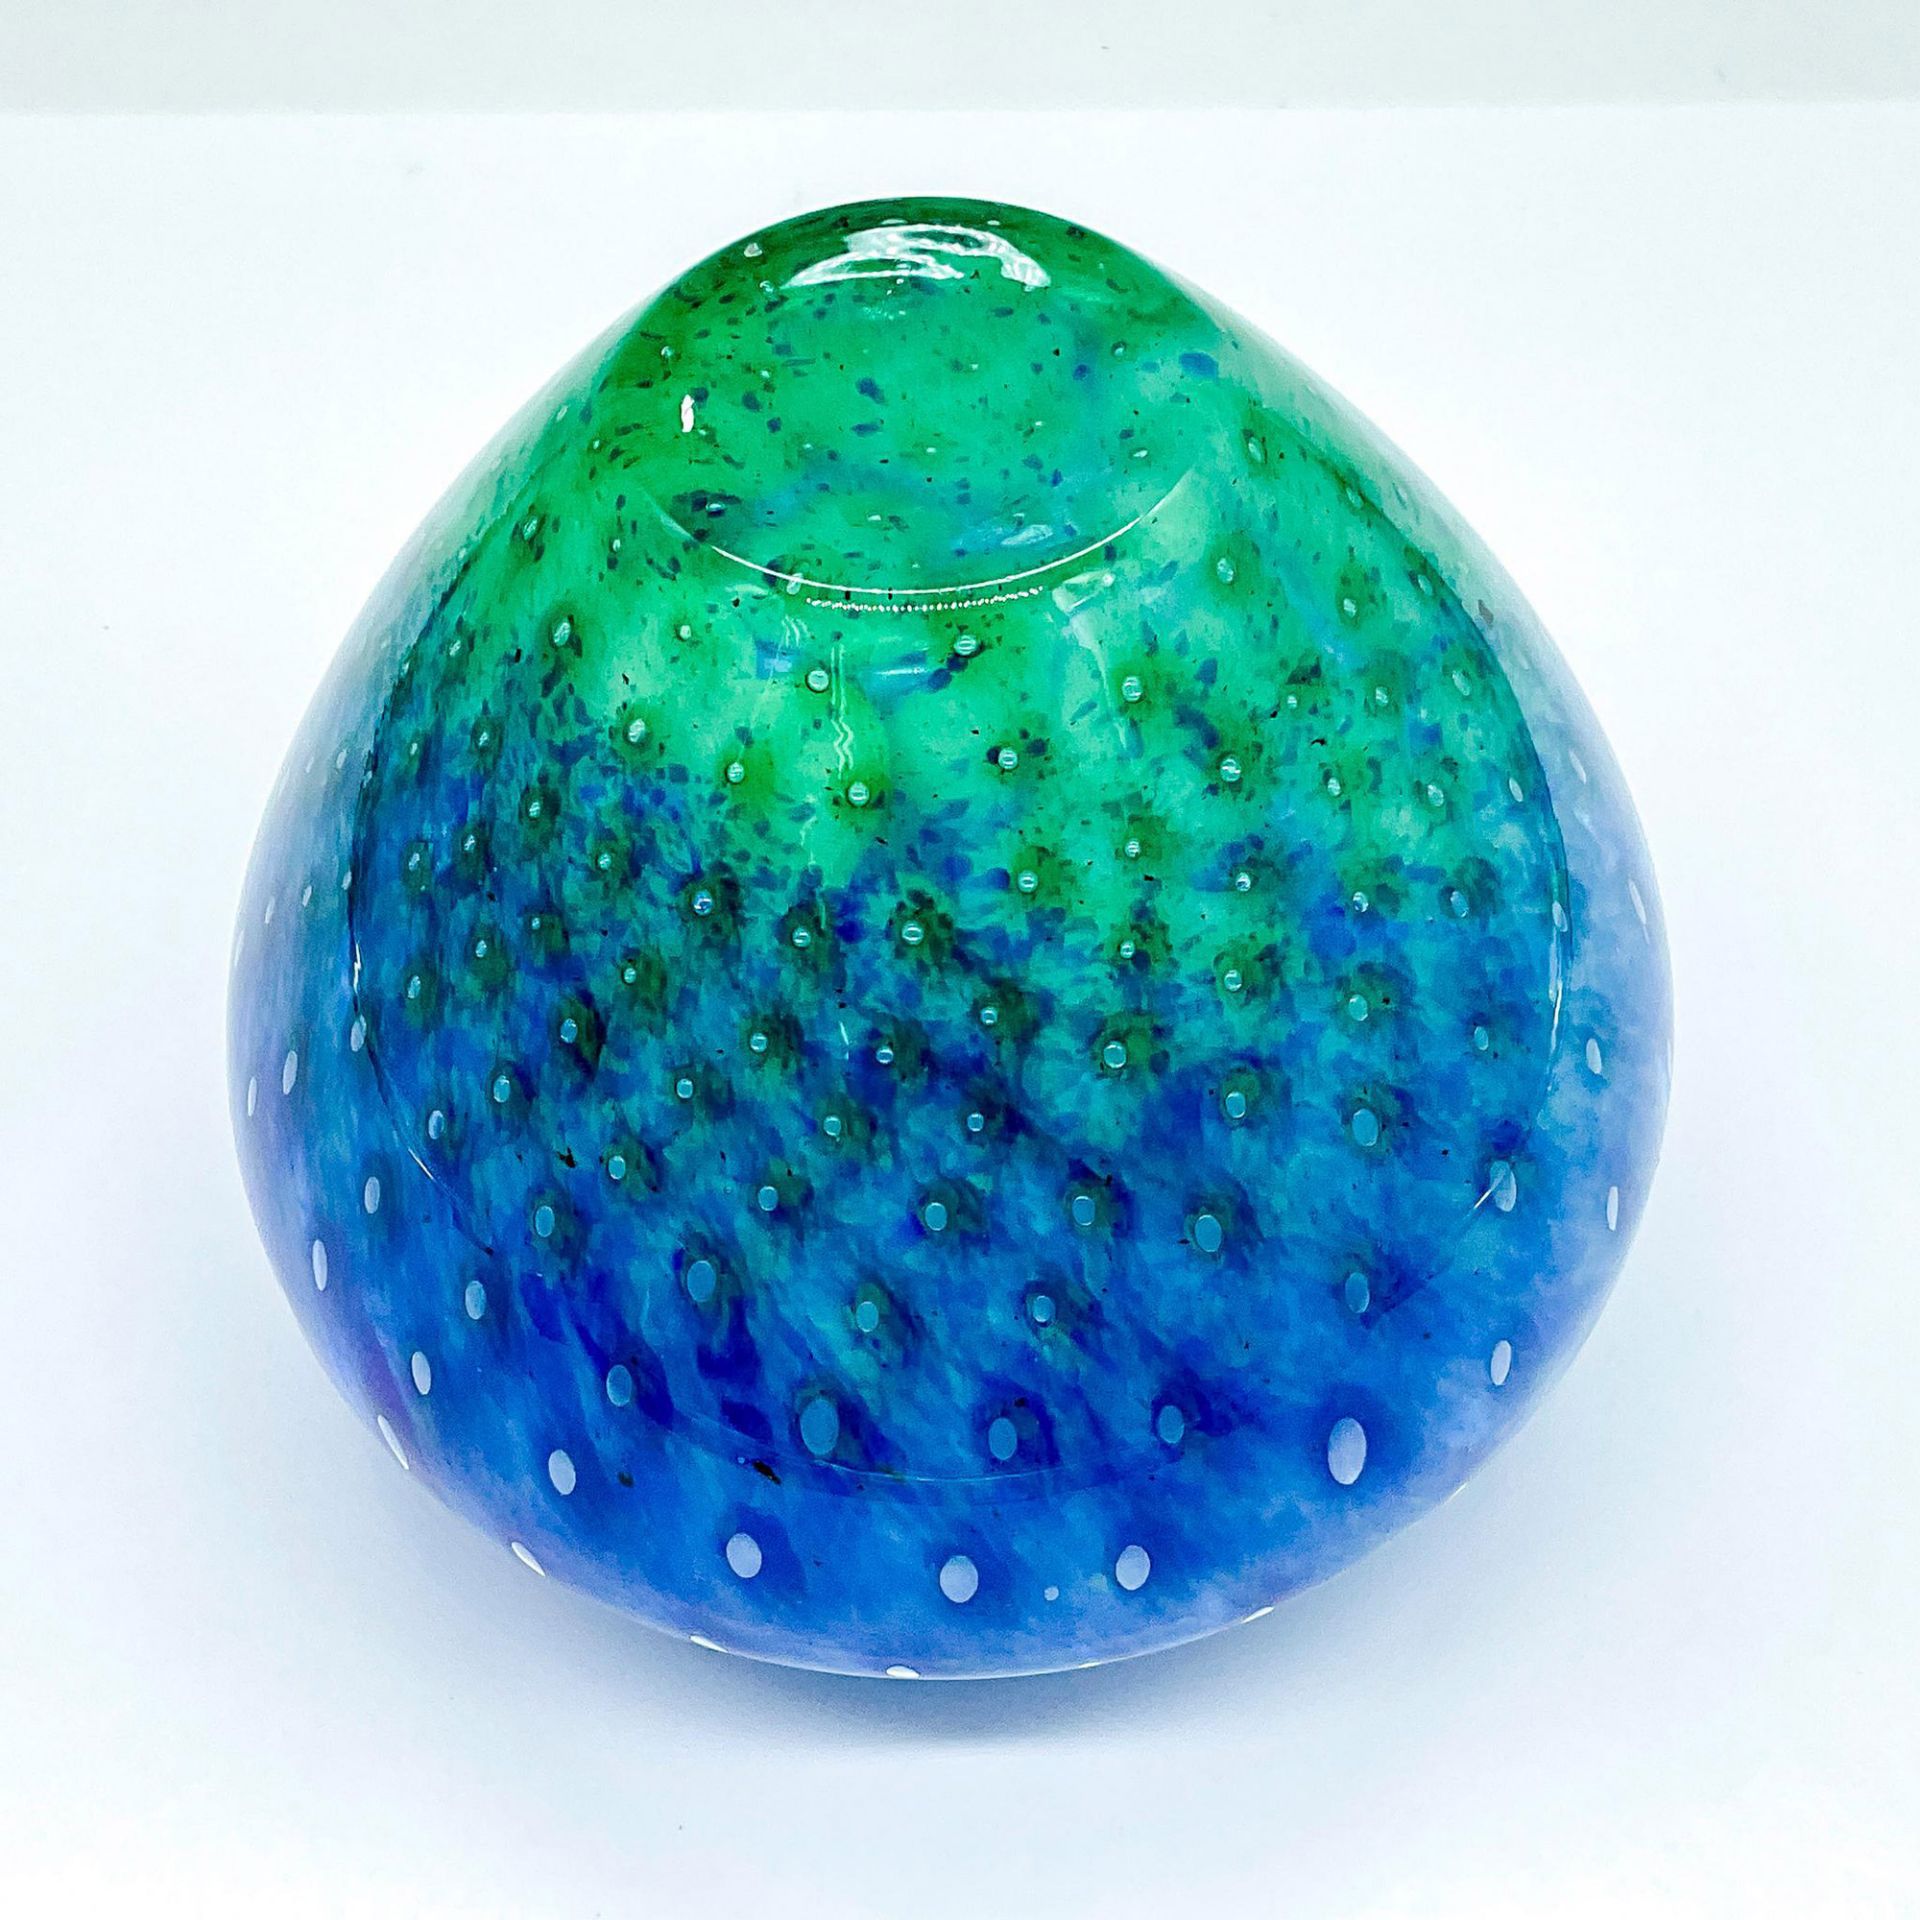 Blue and Green Art Glass Vase - Image 3 of 3